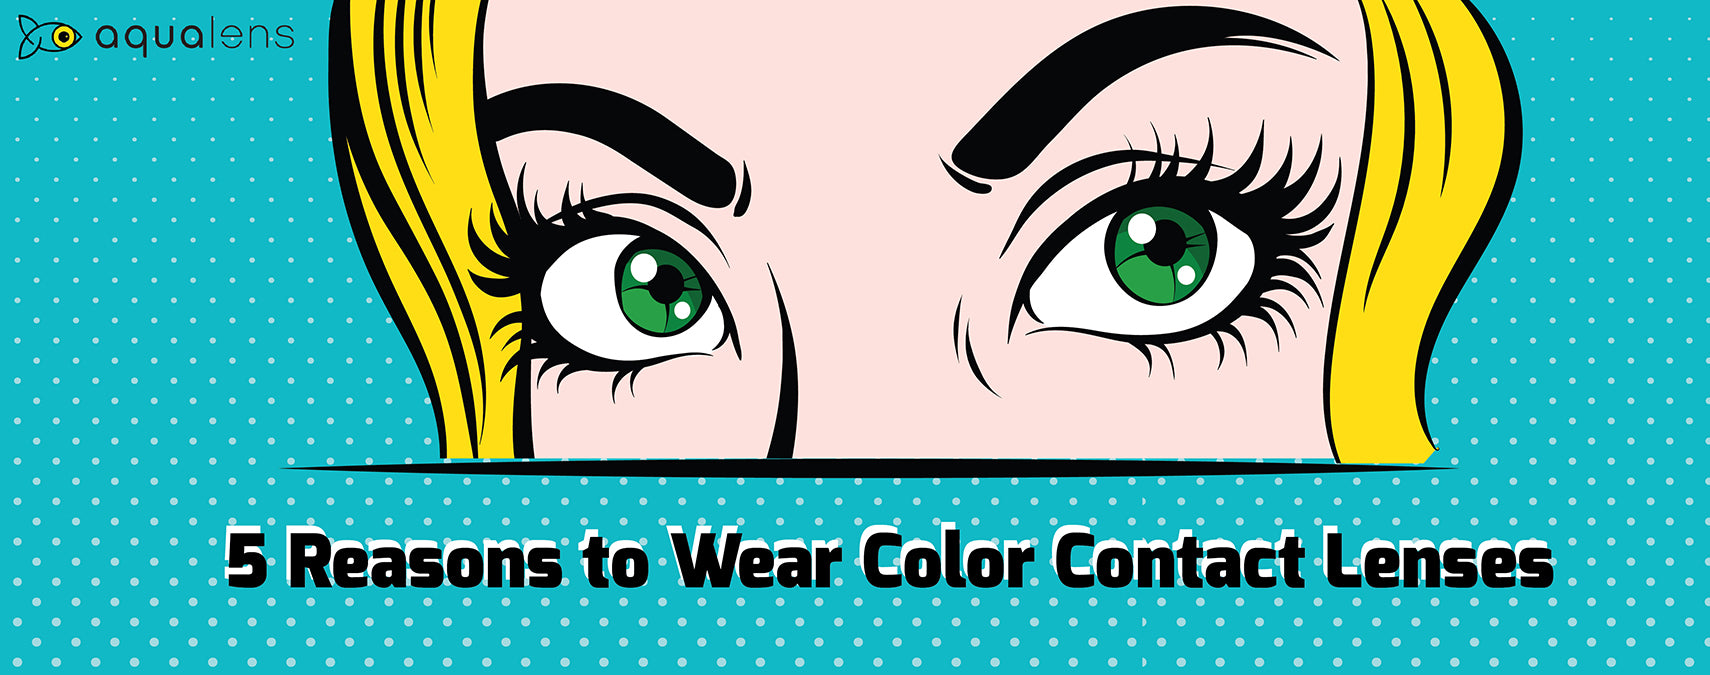 Reasons to wear colored contact lenses